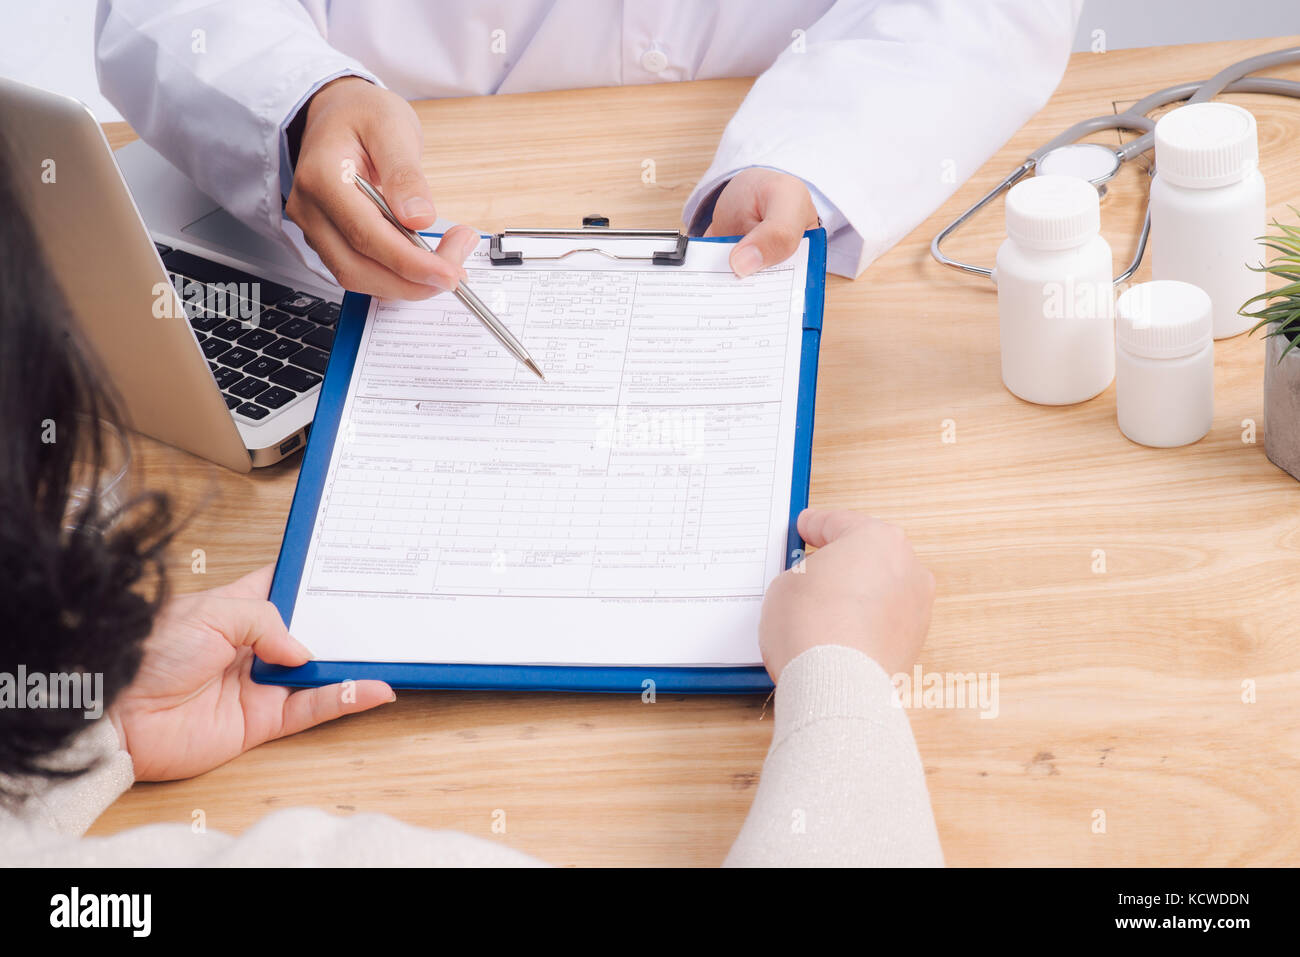 Patient and doctor taking notes on health insurance paperwork Stock Photo